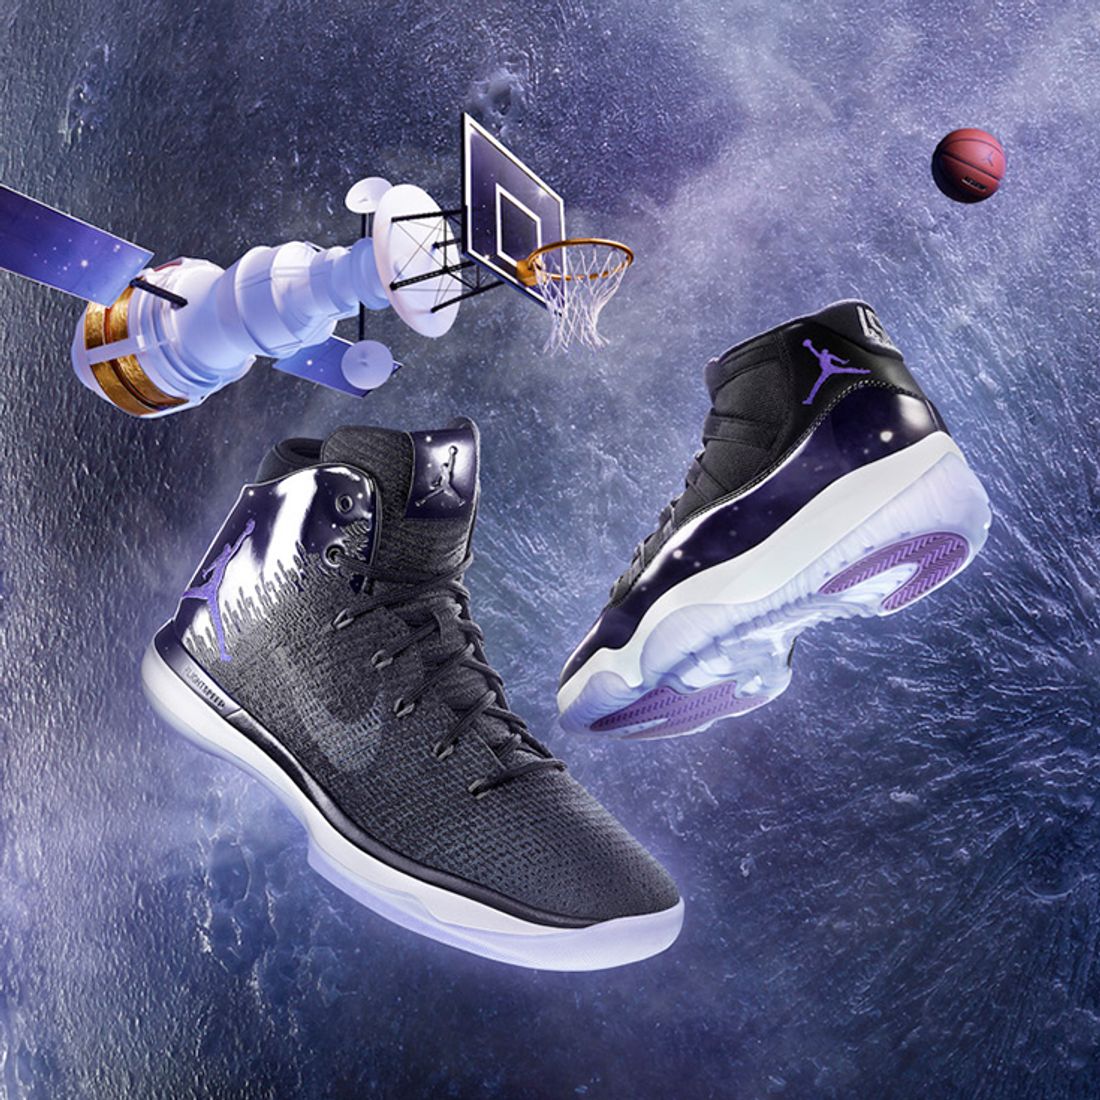 Jordan Brand Is Releasing MJ's Famous Practice Shorts from Space